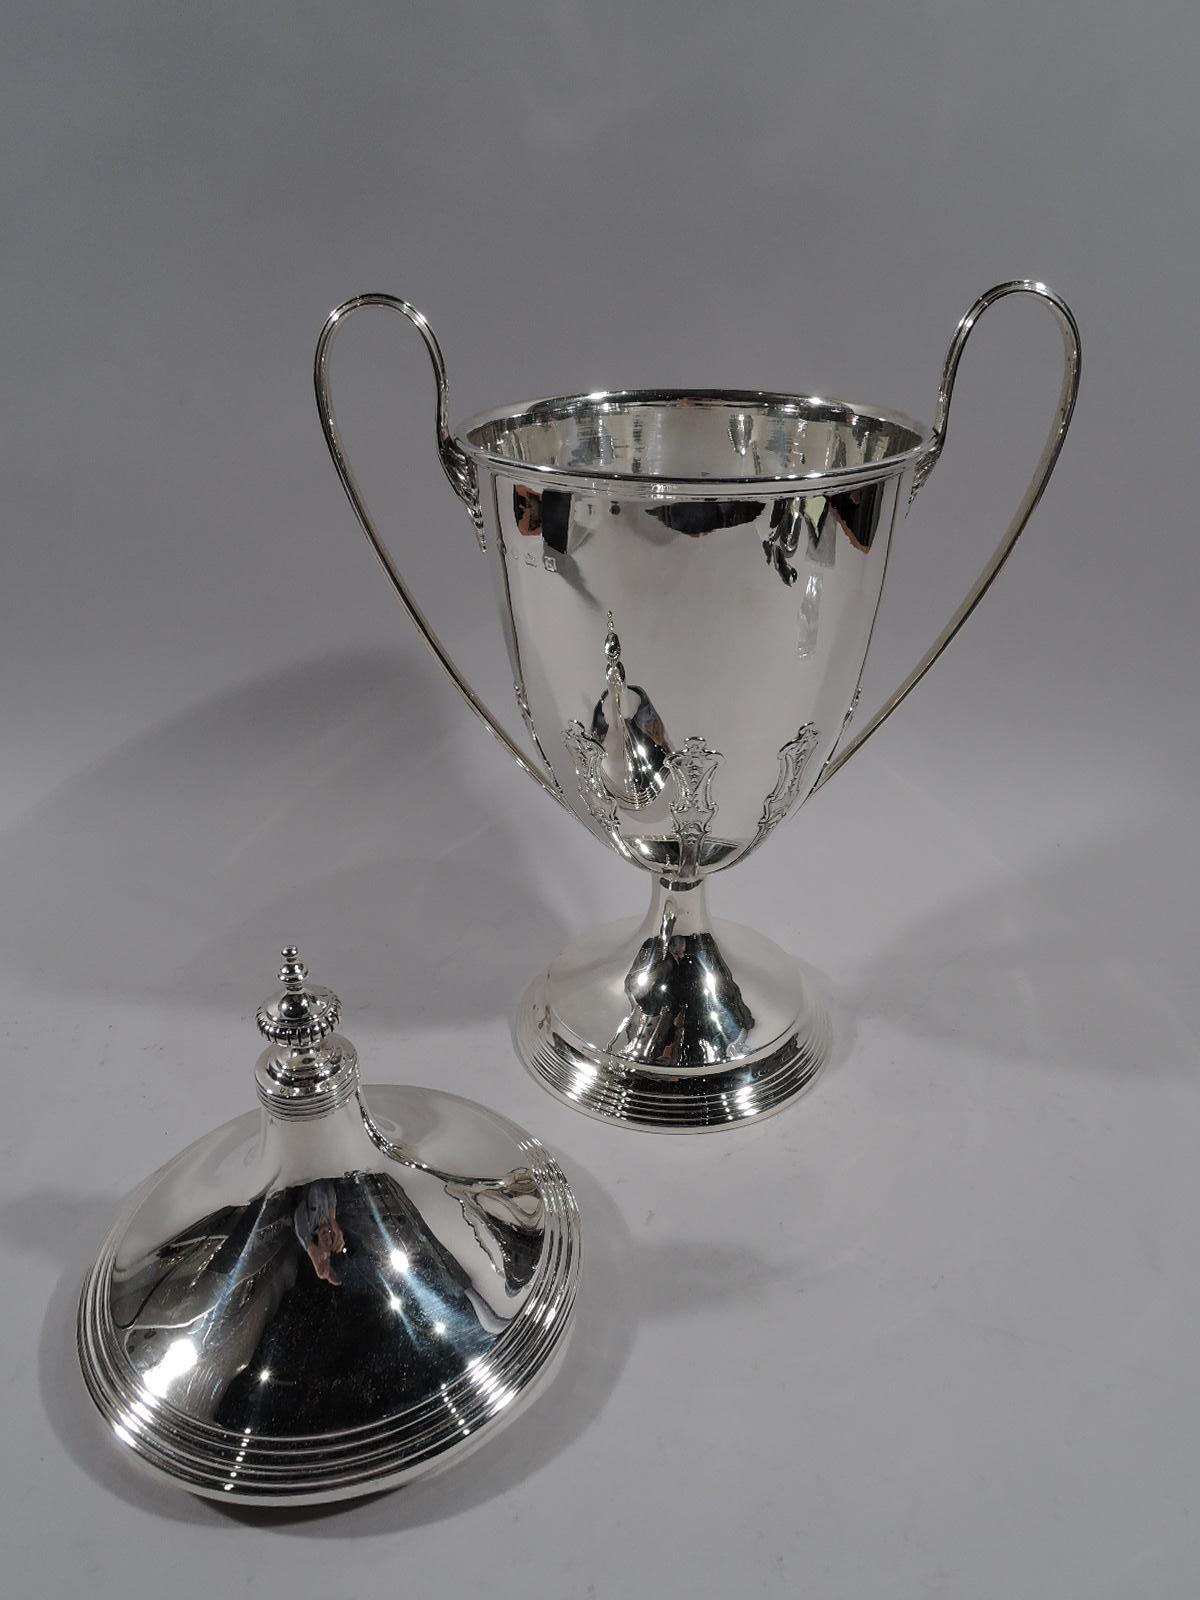 George V sterling silver covered urn. Made by Alexander Clark Co. Ltd in Birmingham in 1926. Oval bowl with leaf-mounted high-looping handles; short support flowing into raised foot. Cover domed with lobed vase finial. Bowl base has applied and